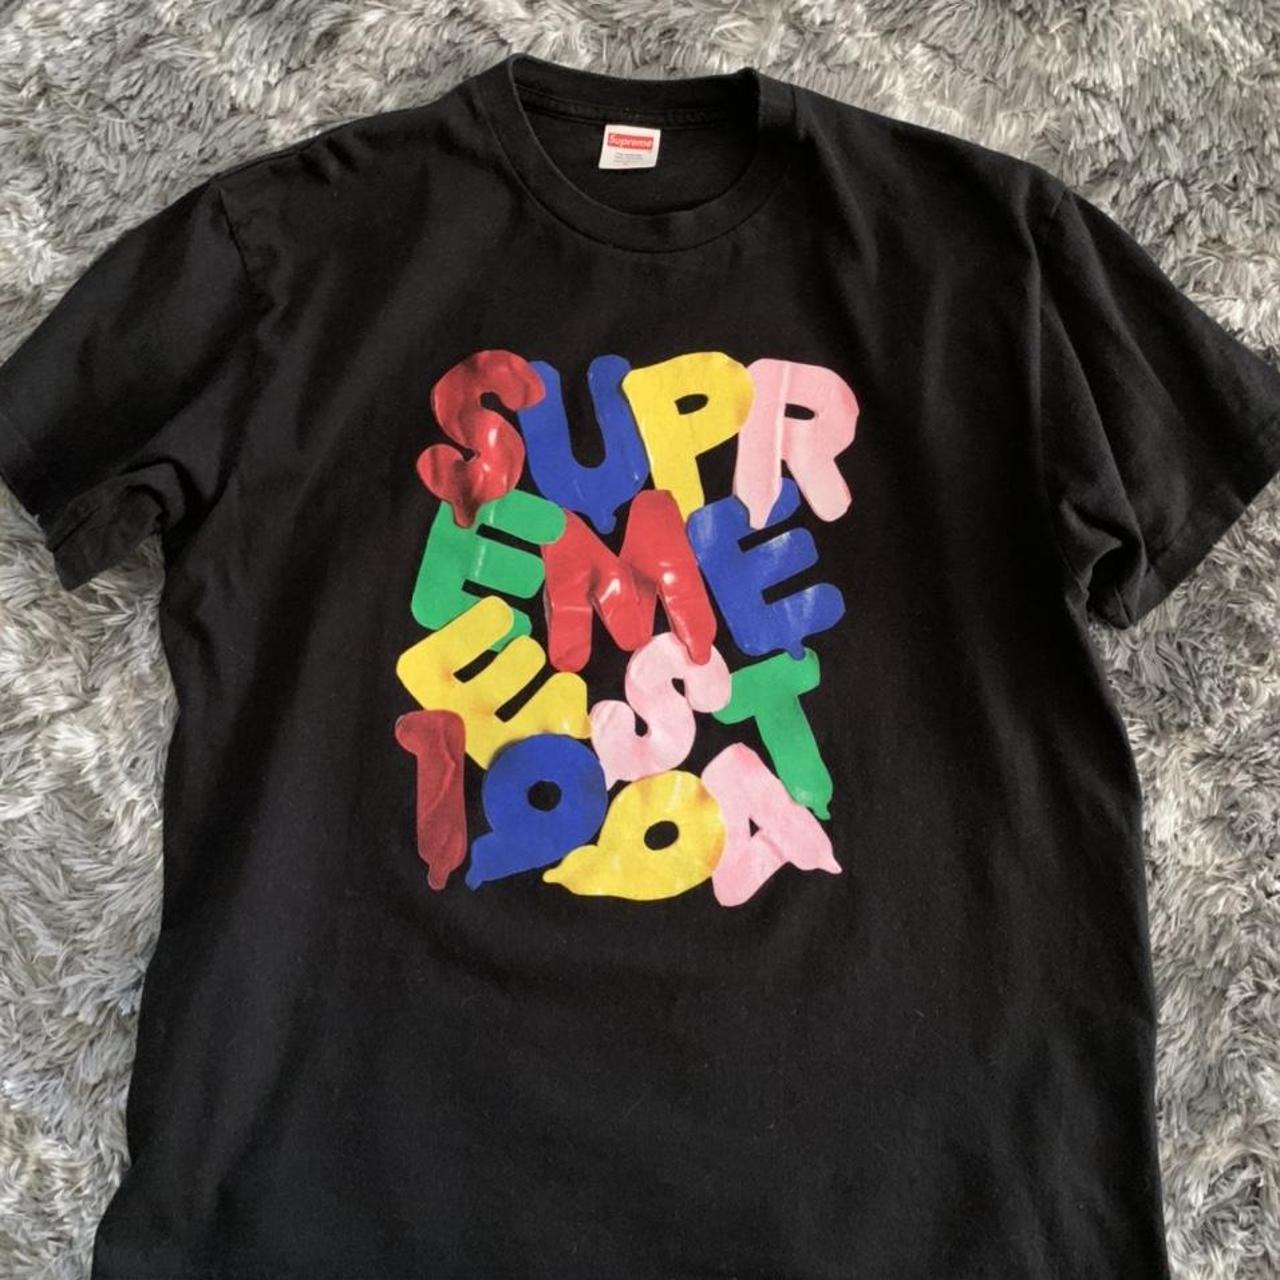 Supreme balloons tee, Size L, 8/10, $50.00 + Shipping...